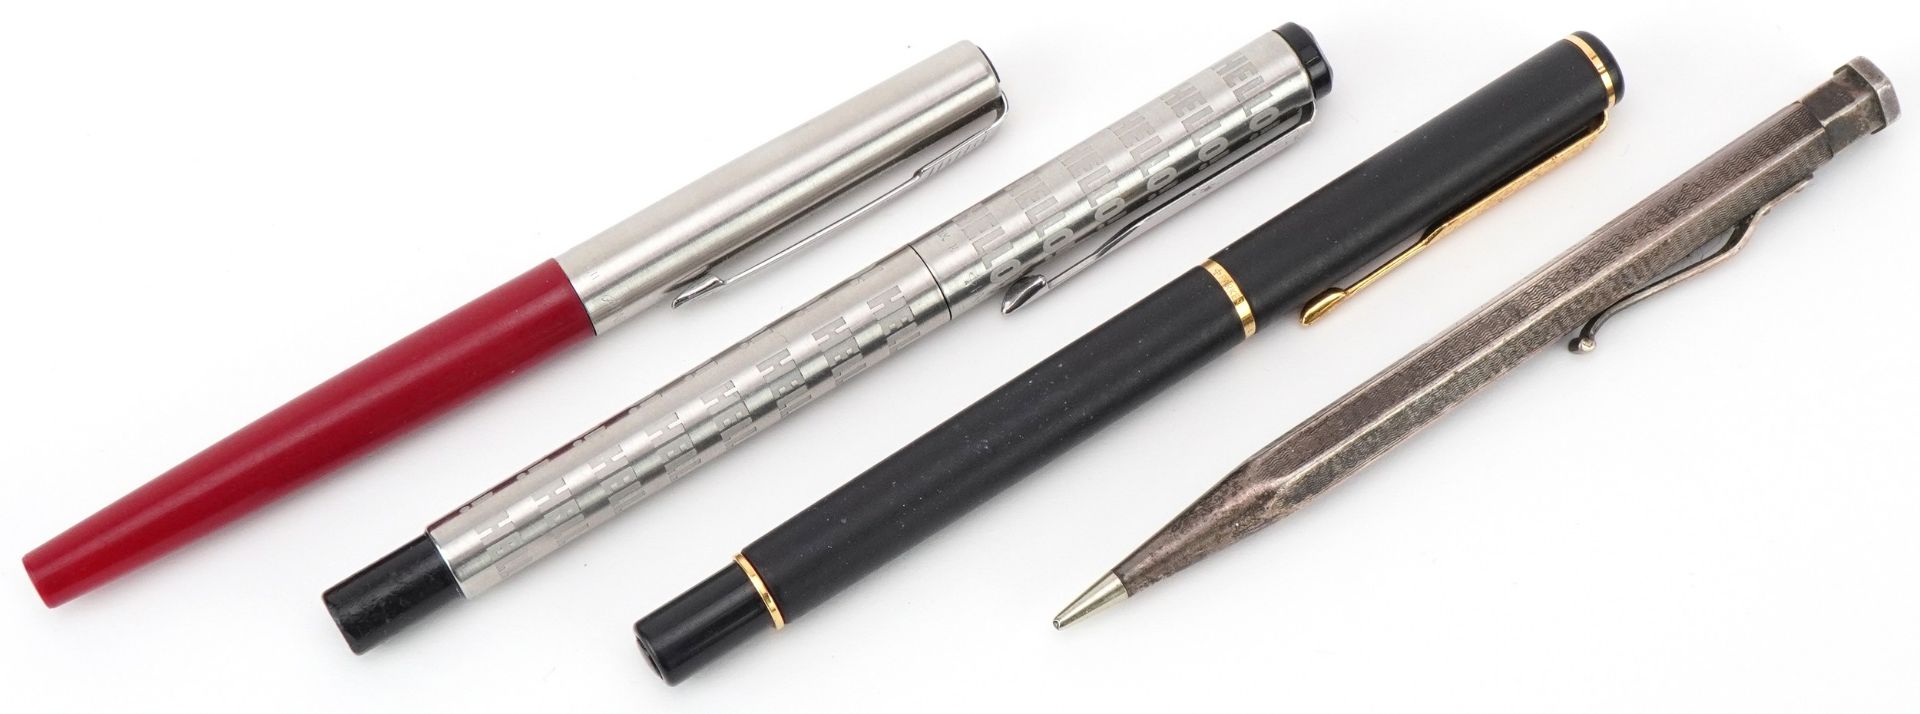 Yard-O-Led rolled silver propelling pencil and three Parker pens including one advertising Hello - Bild 2 aus 4